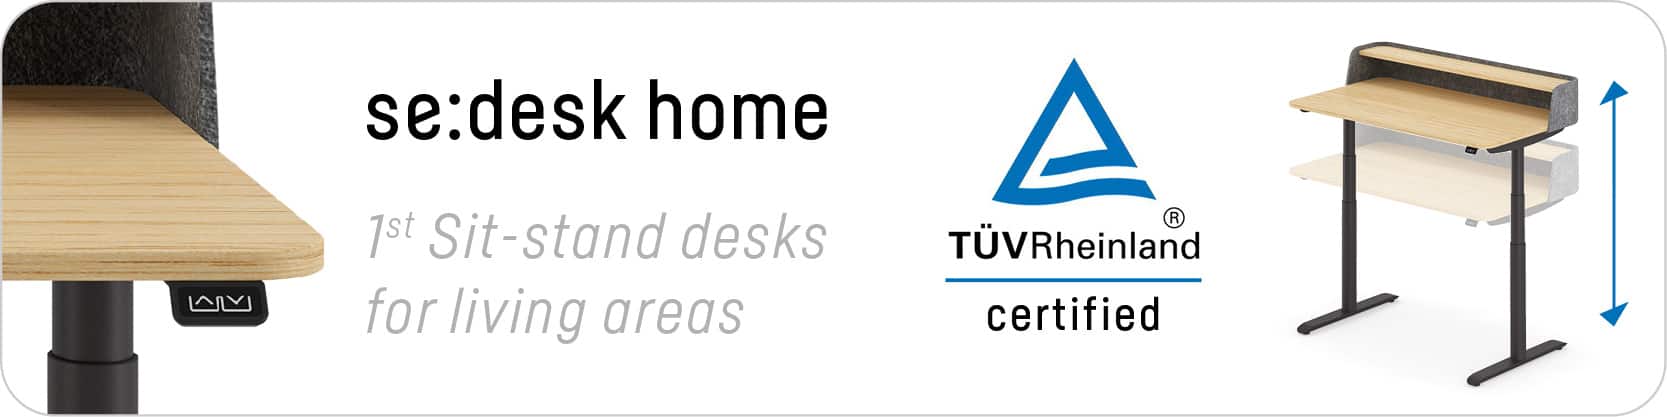 se:desk home certified by TÜV Rheinland as a desk for the home office